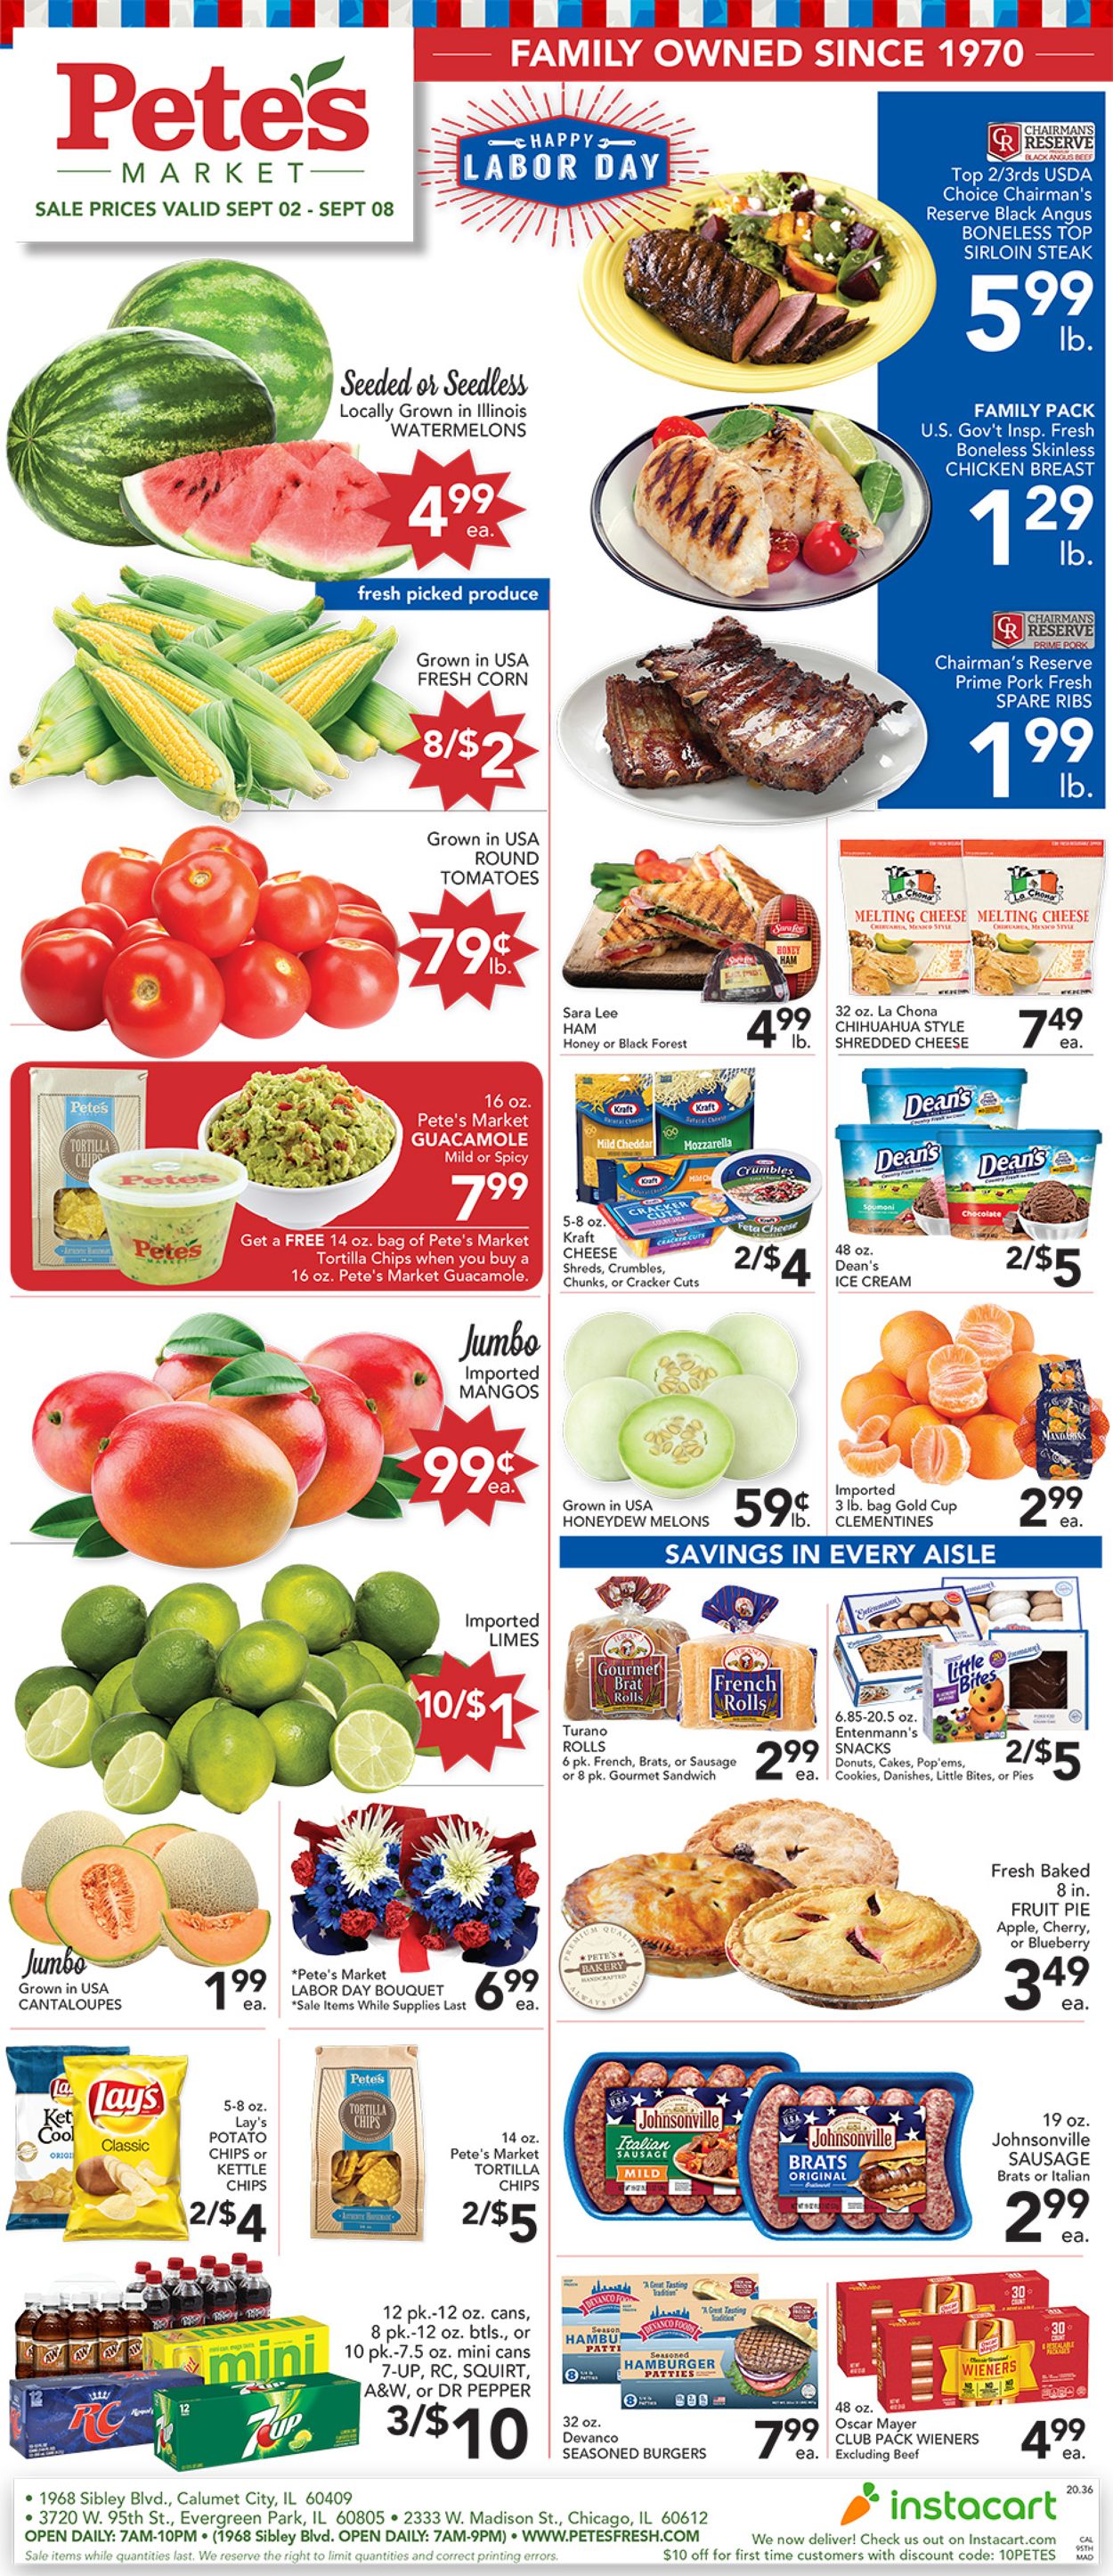 Pete's Fresh Market Current weekly ad 09/02 - 09/08/2020 ...